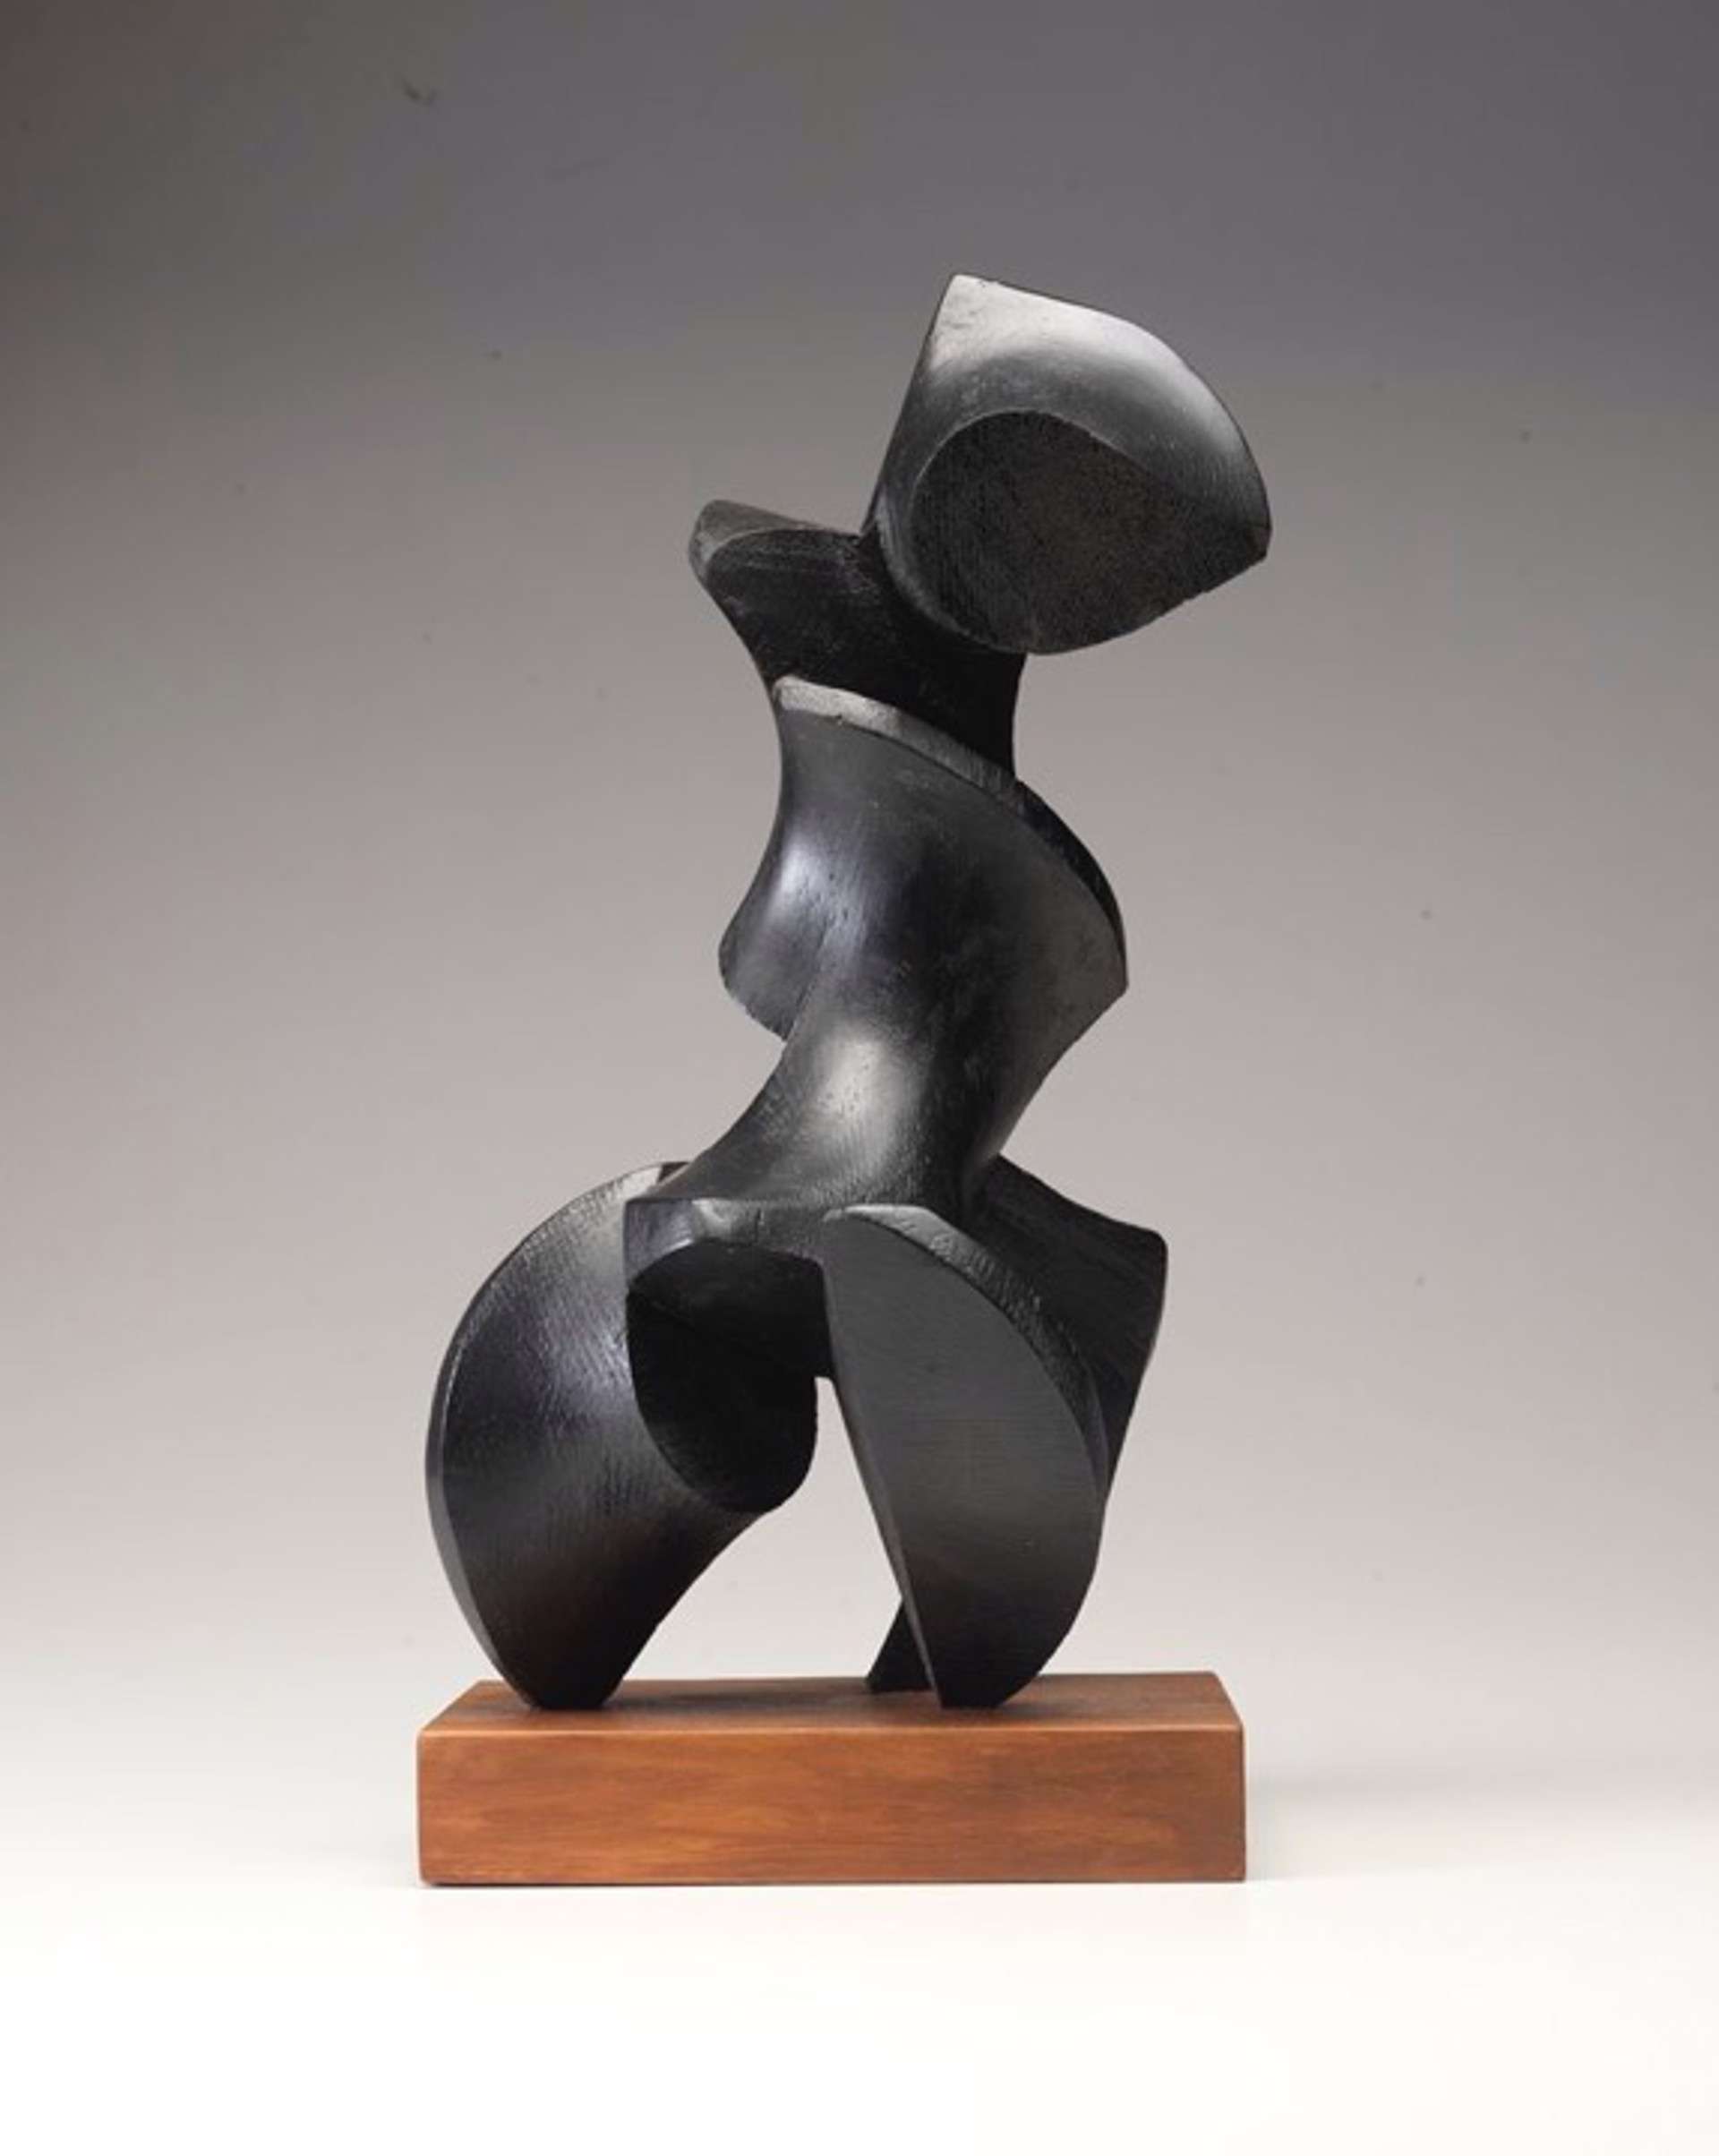 Abstract Form on Three Points by Gilbert Franklin